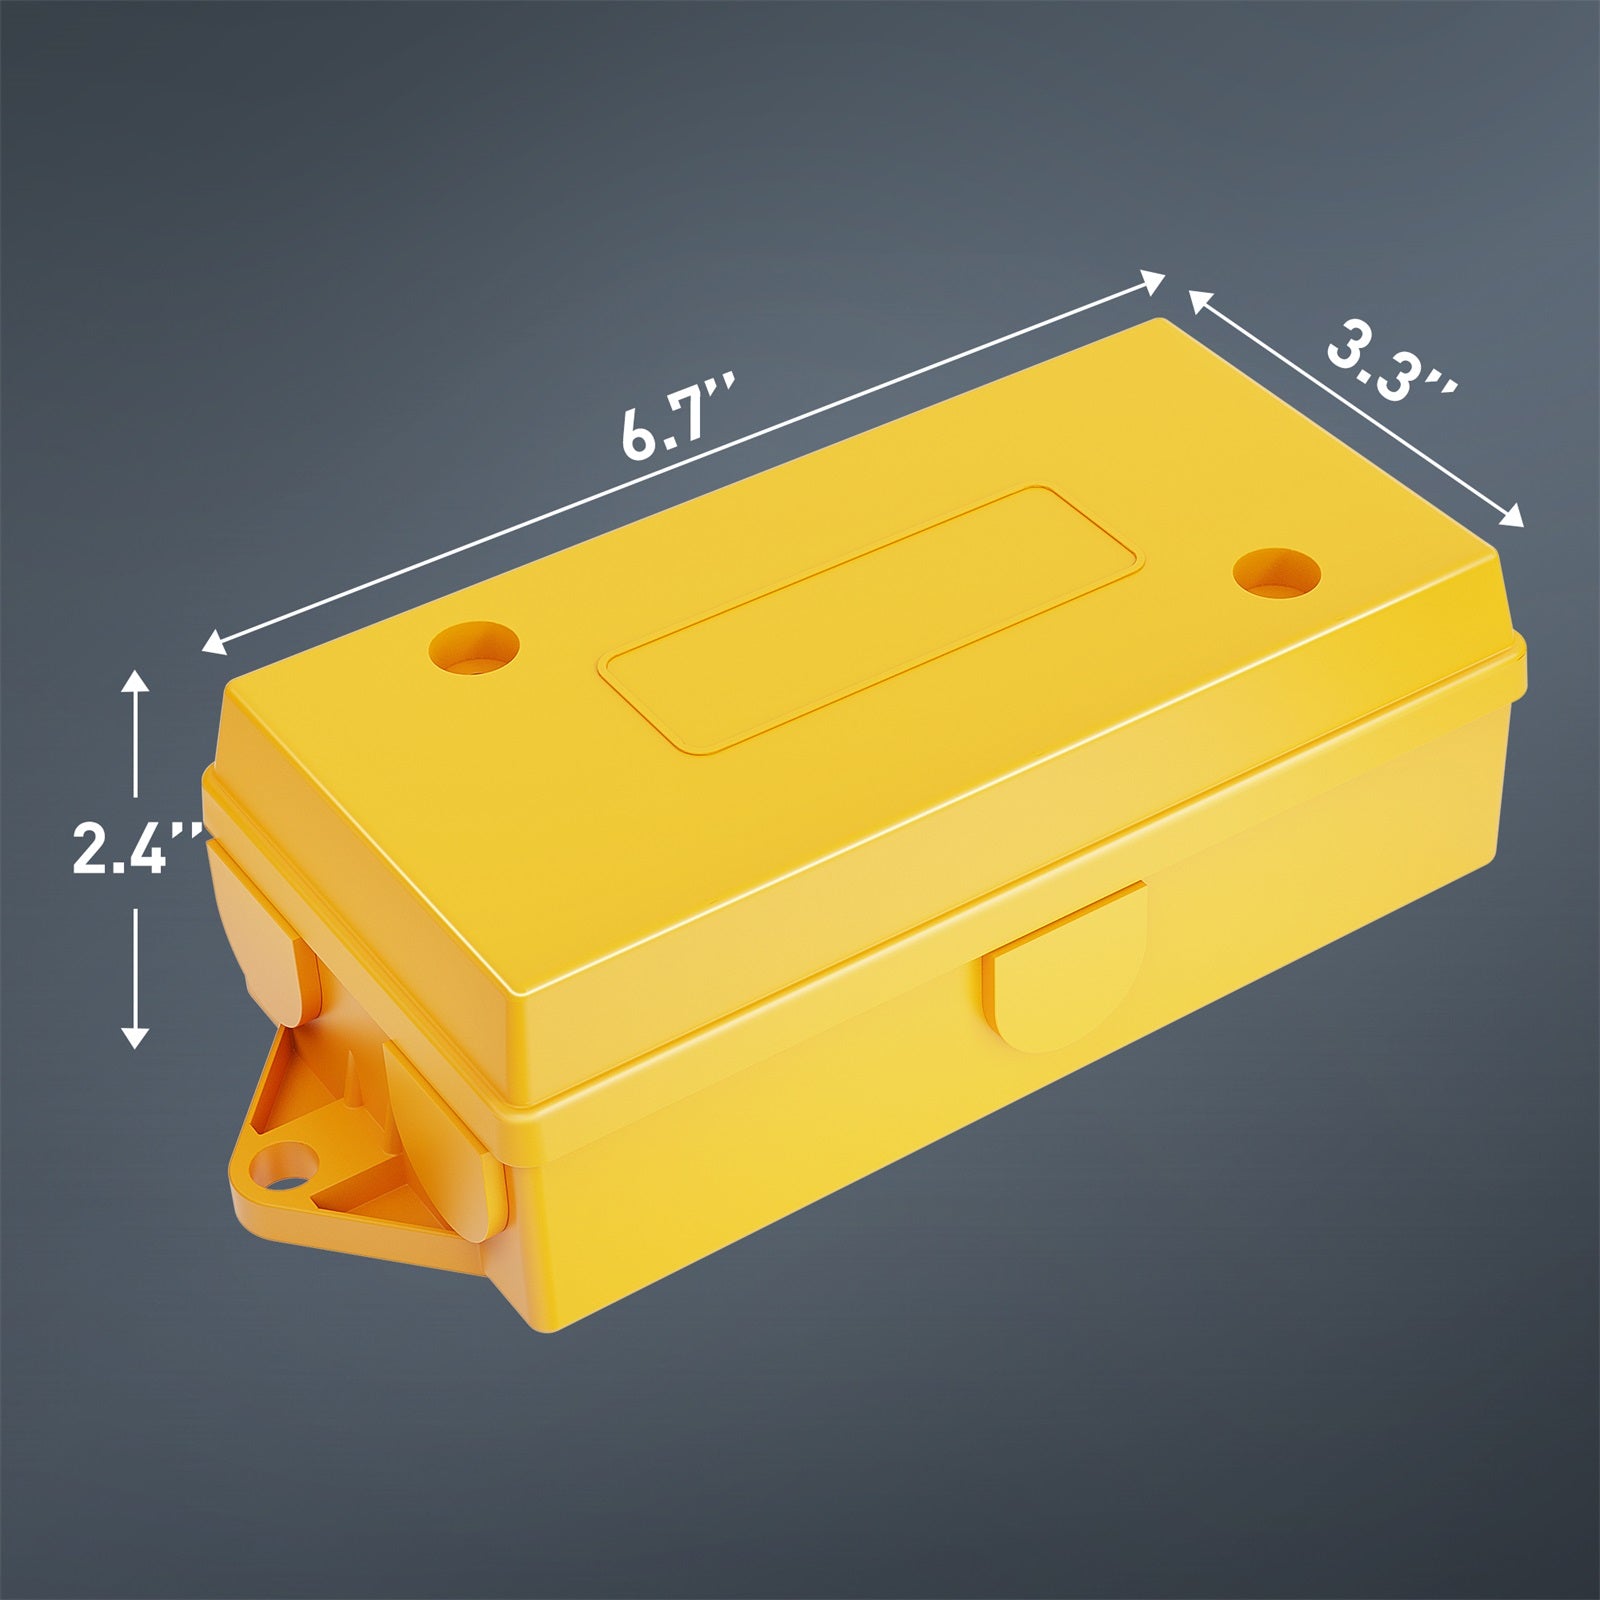 7 Way Electrical Trailer Junction Box with See-Through Lid, 7 Gang Wire Connection Box Waterproof